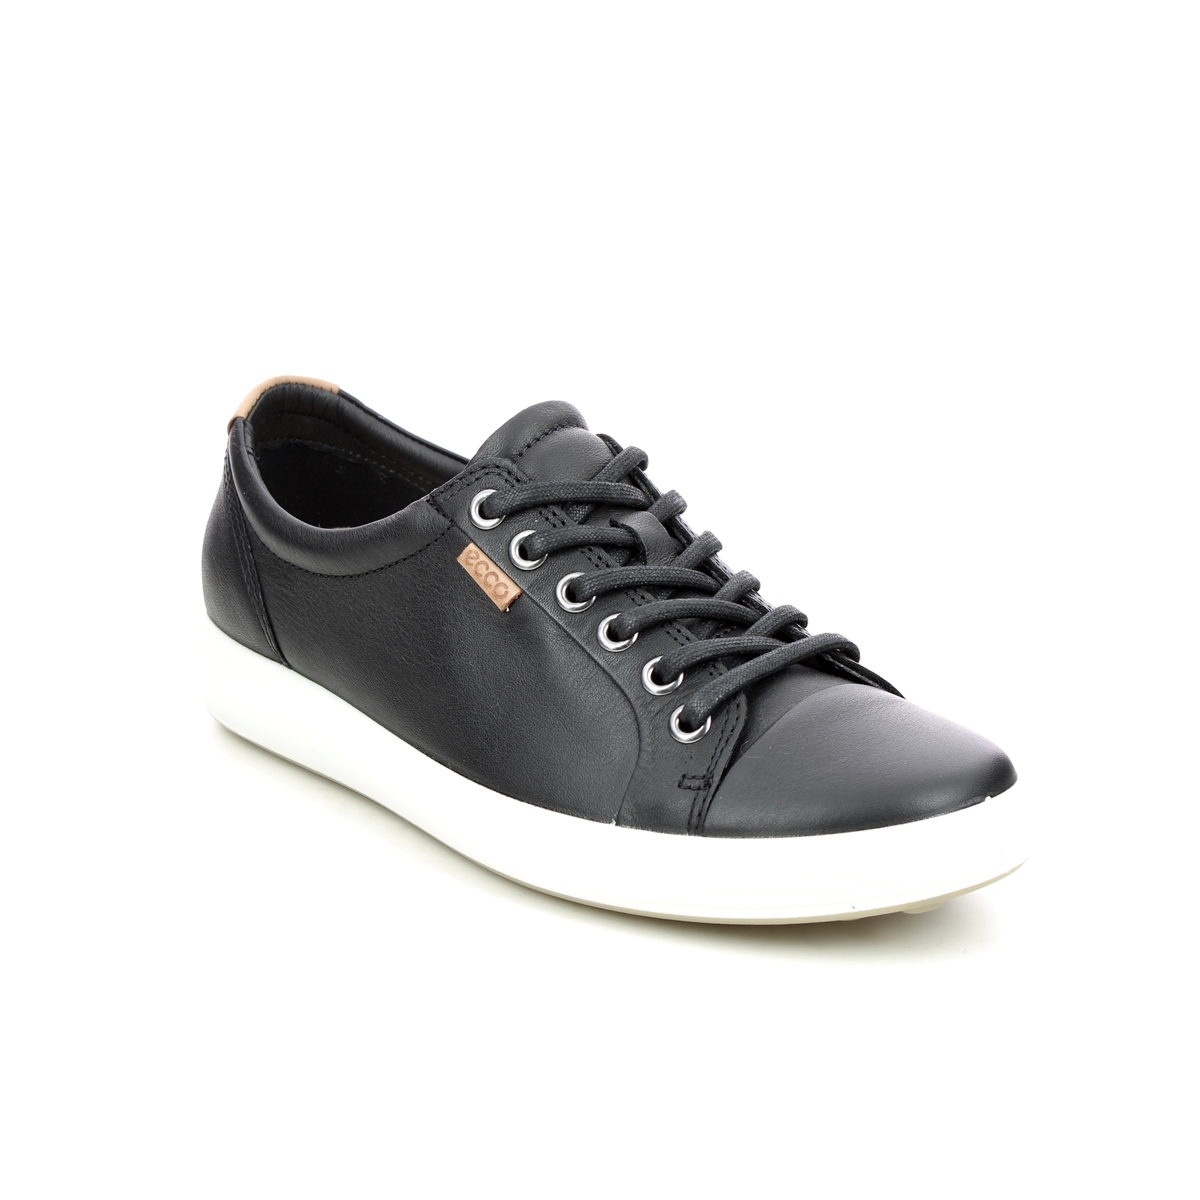 Ecco Soft 7 Lace Black Leather Womens Trainers 430003-01001 In Size 40 In Plain Black Leather